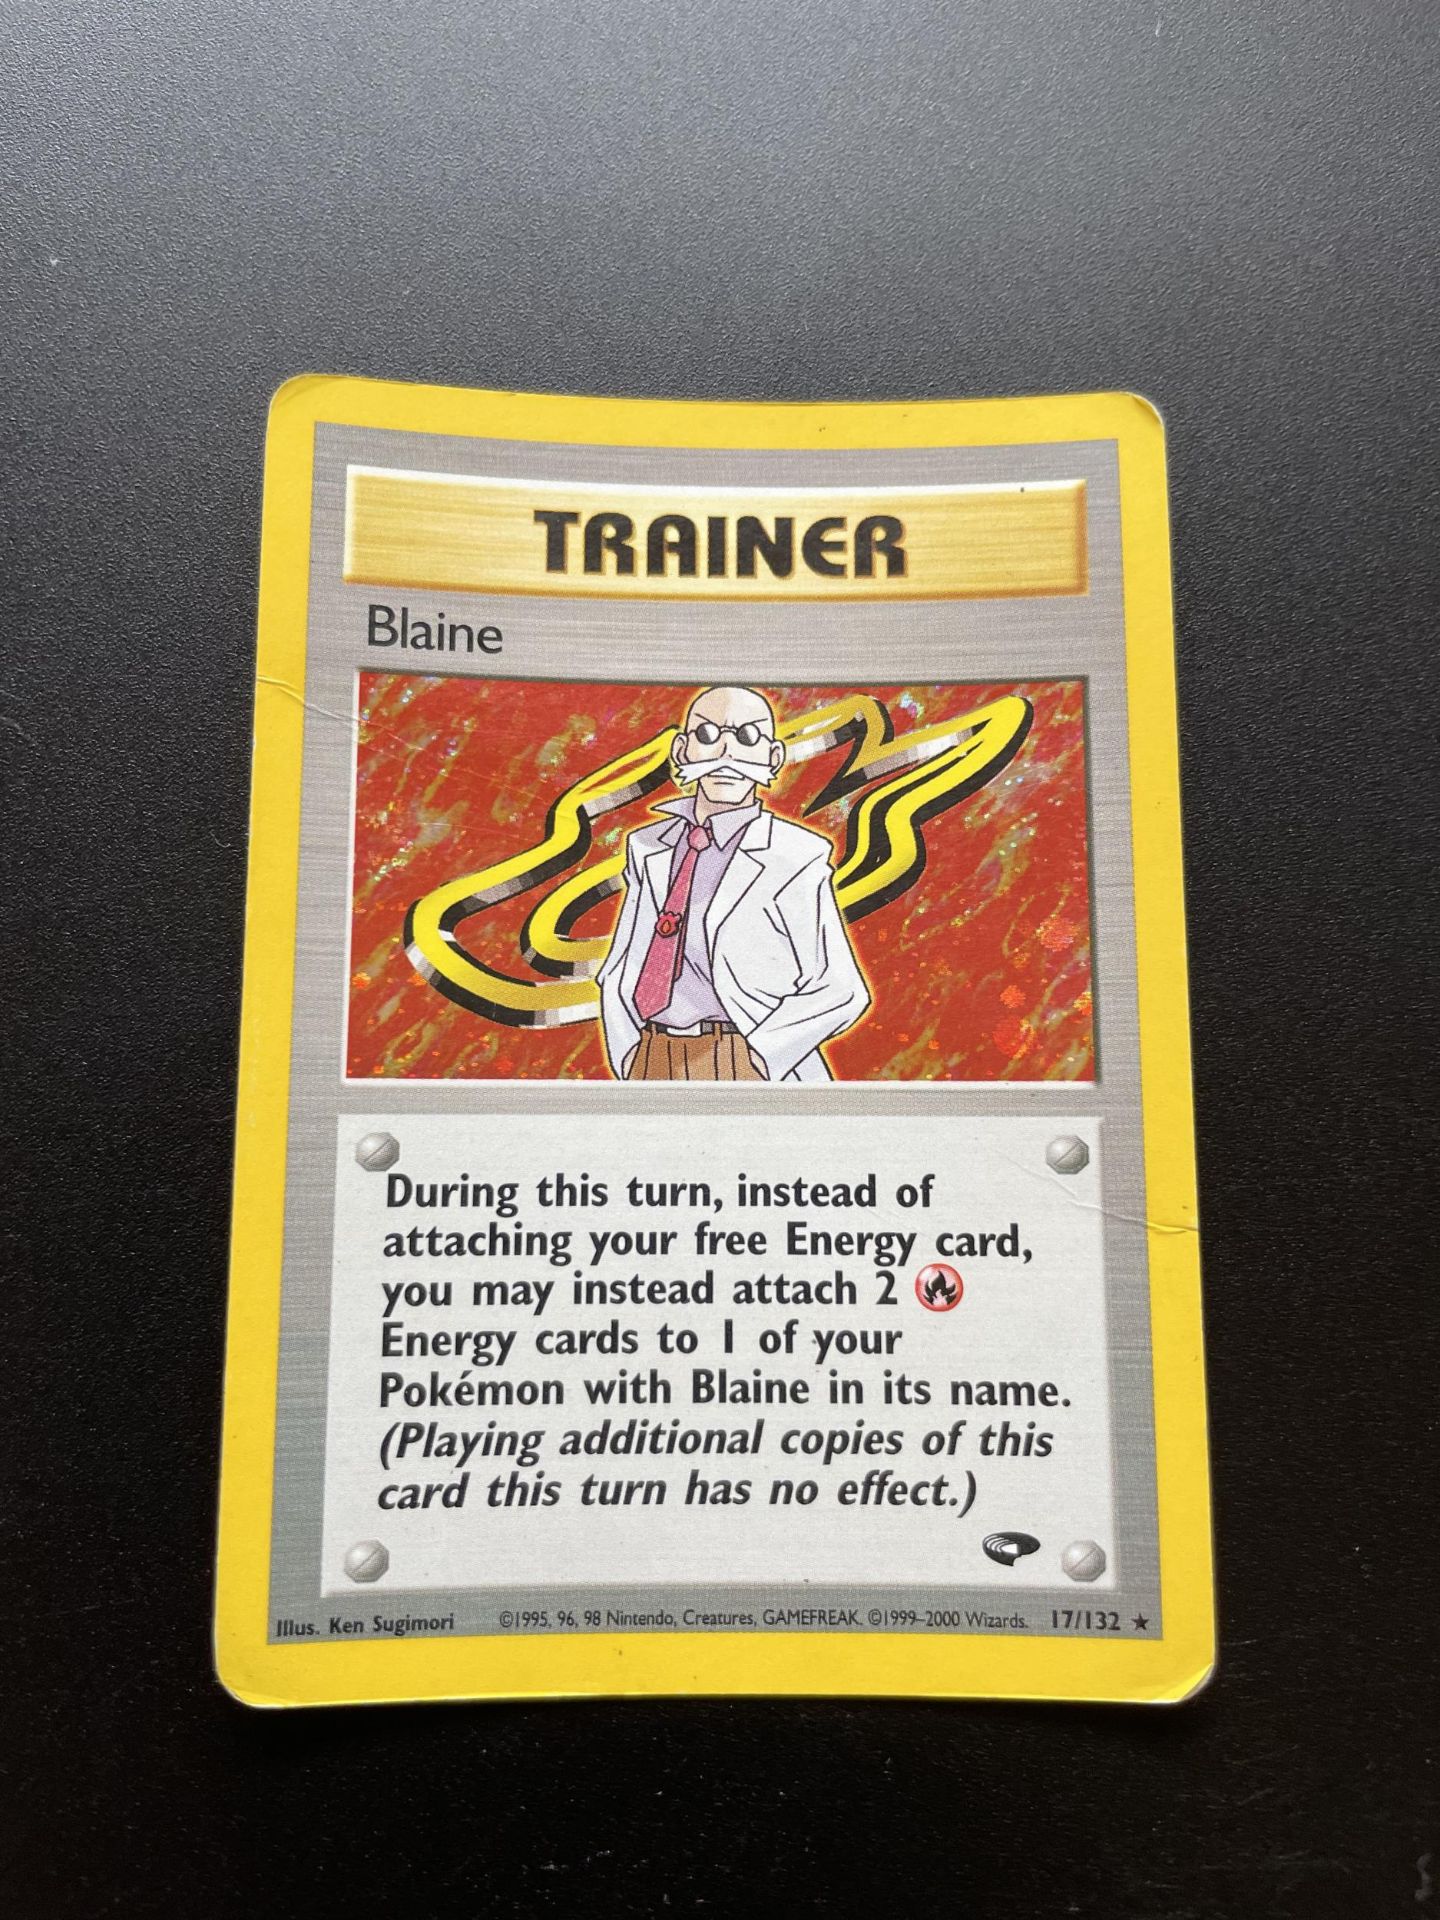 A COLLECTION OF 1999 WOTC POKEMON CARDS, FOSSIL SET, HOLO BLAINE GYM HEROES TRAINER ETC - Image 3 of 5